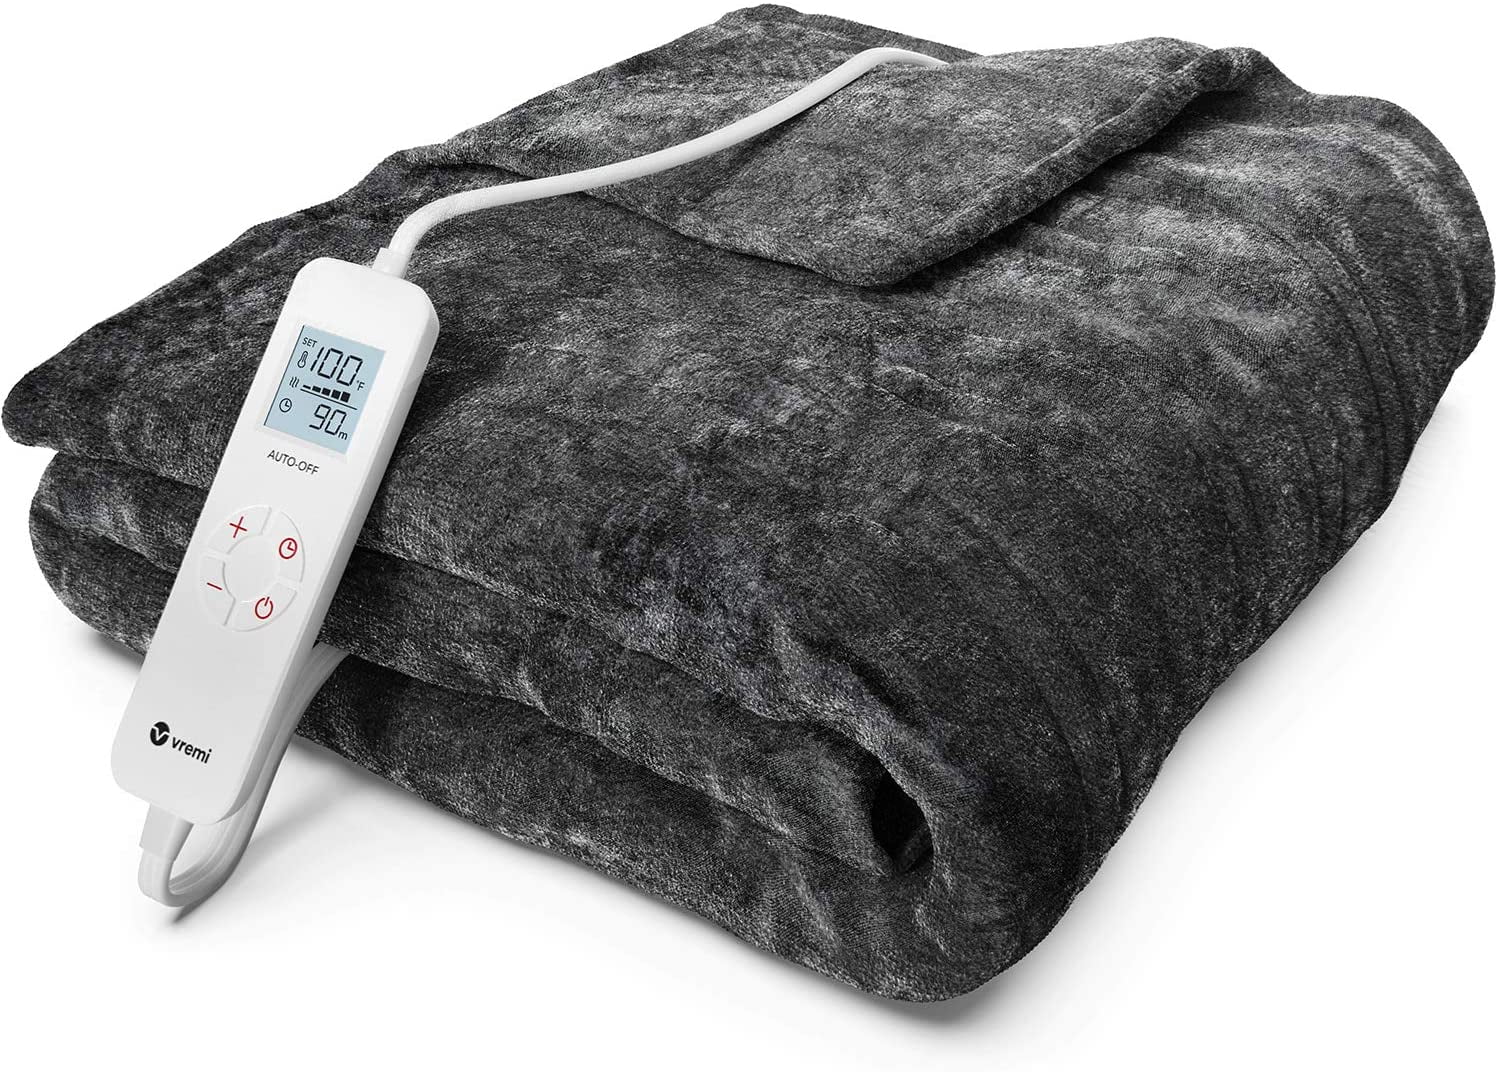 CKWGI Heater FlannelSoft and Portable Heating Blanket 3 Gear Set upTemperature Timing Controller Room Electric Blanket Pad Mat Winter Heated Keep Warm and Comfort Blanket 31.50x23.62inches